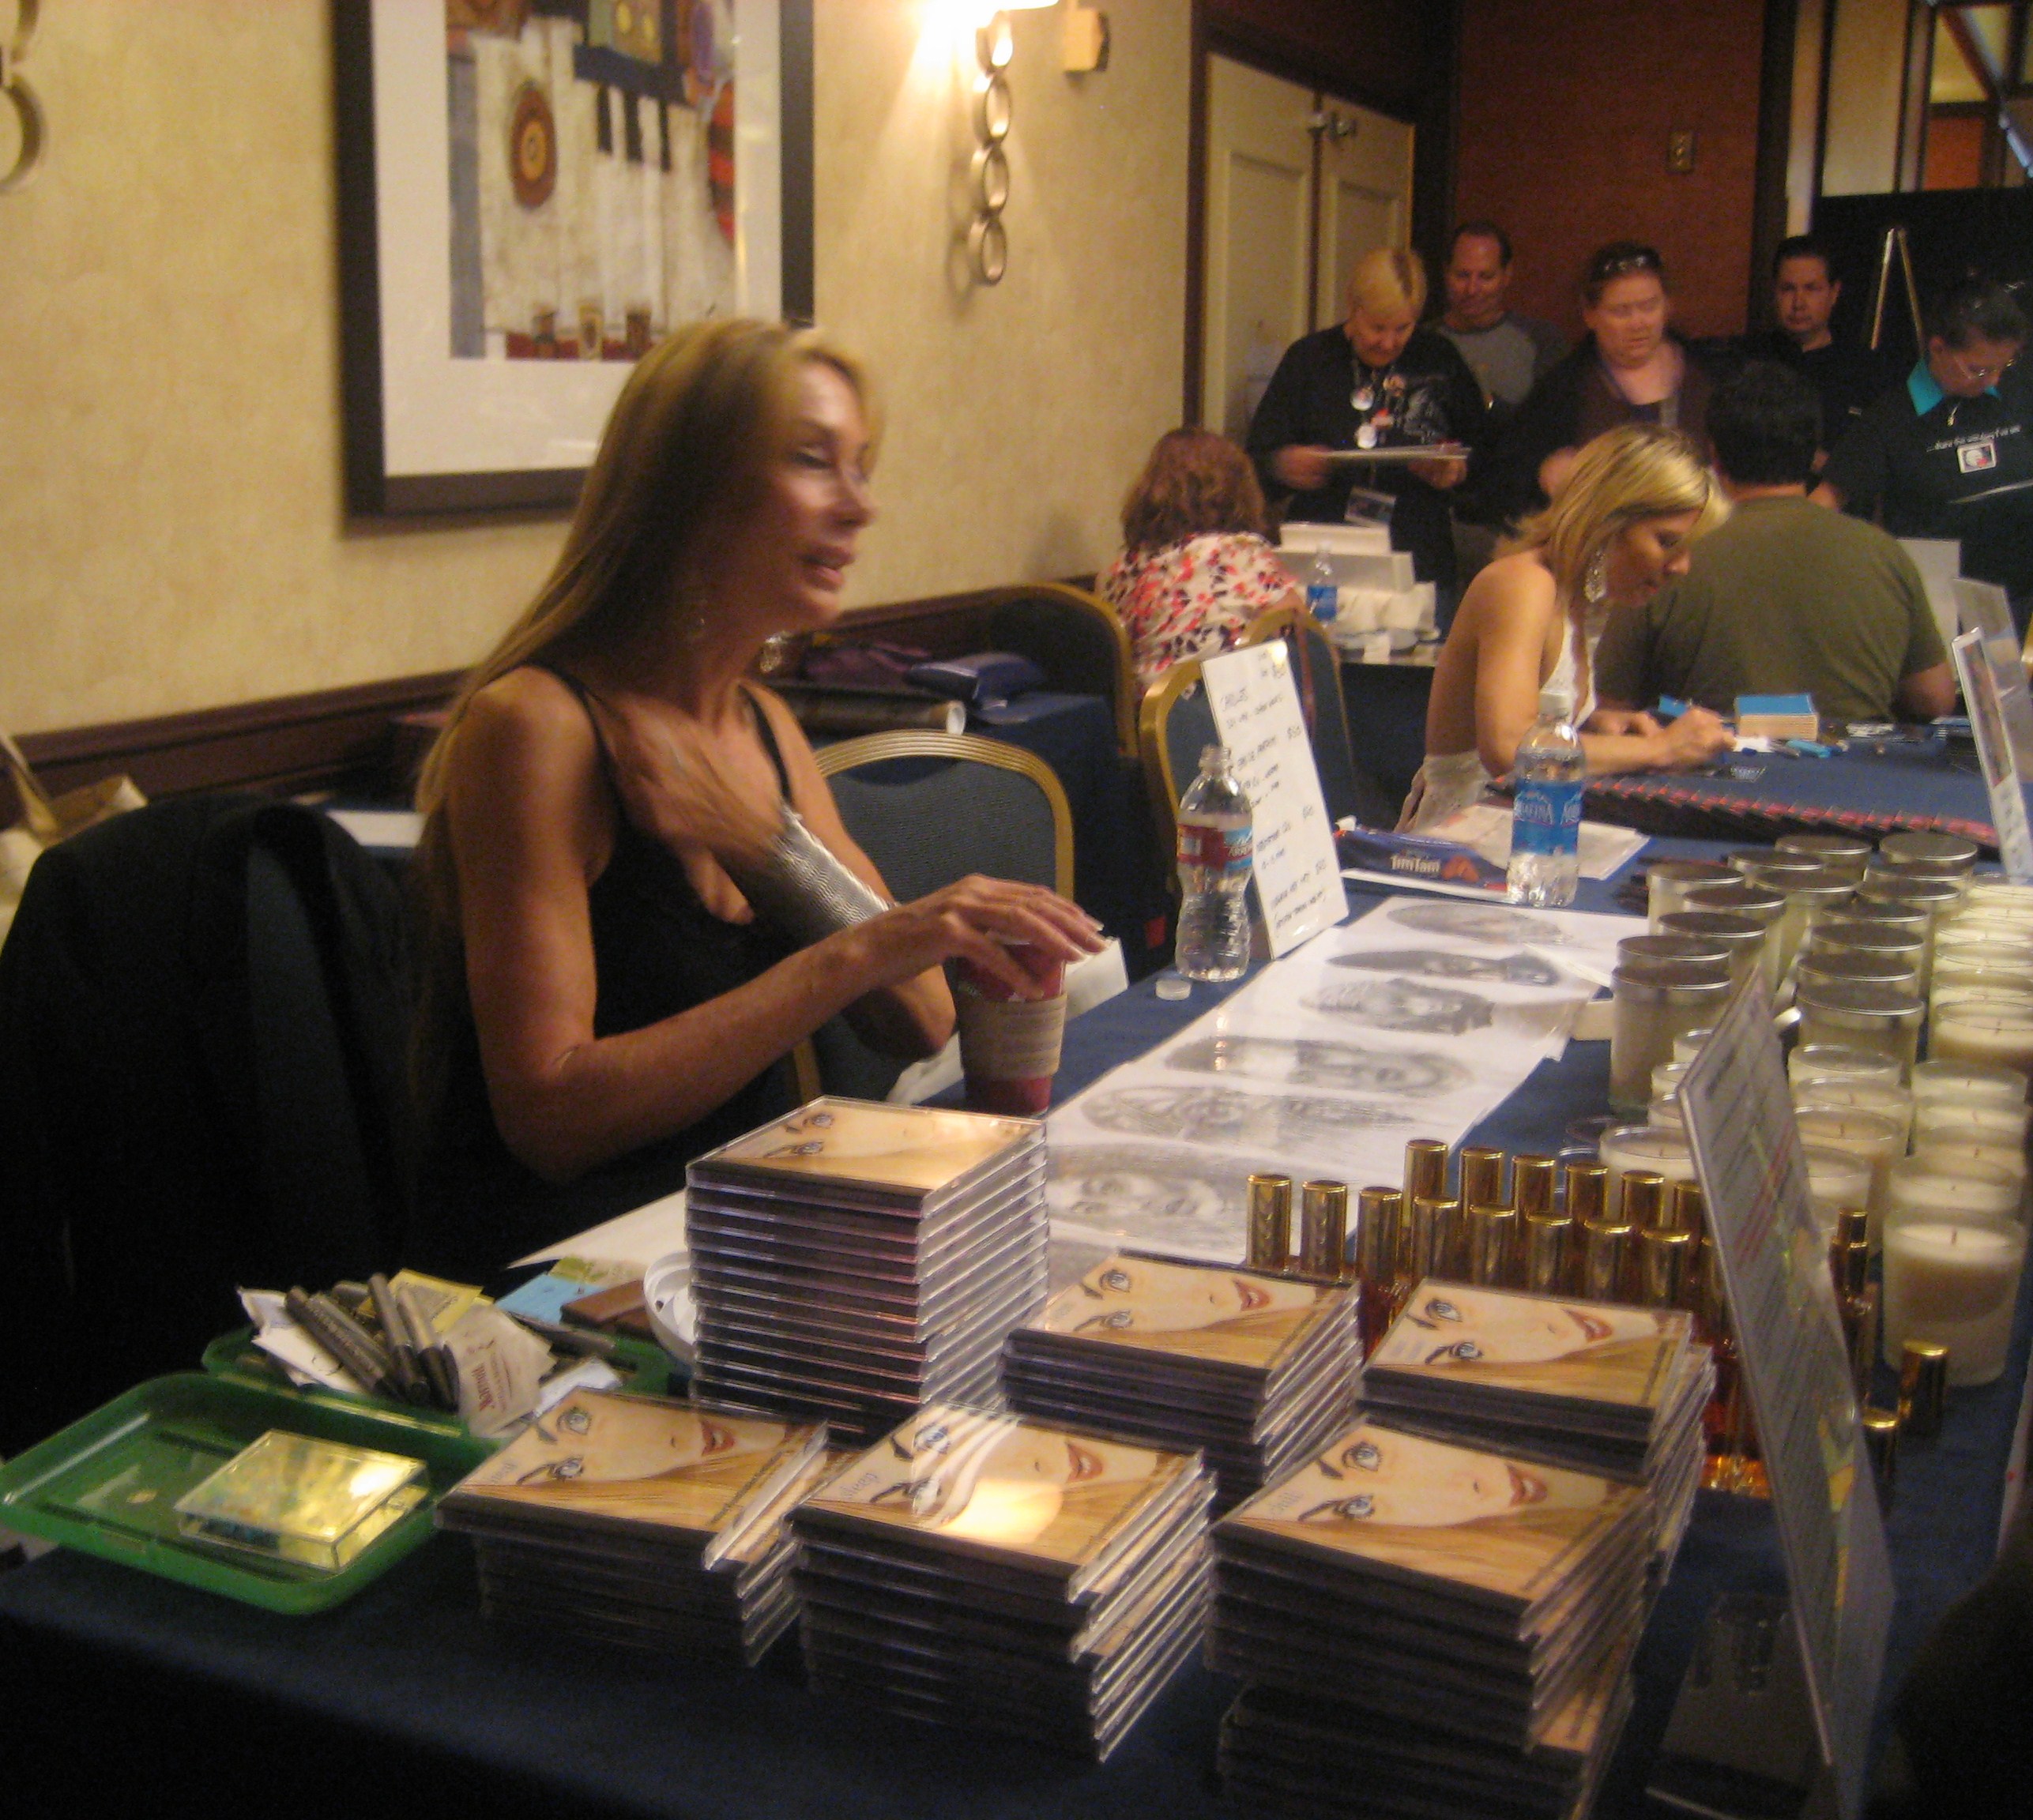 Virgina Hey sells her meditiation CDs while Gigi Edgley sells items a little further down the table.